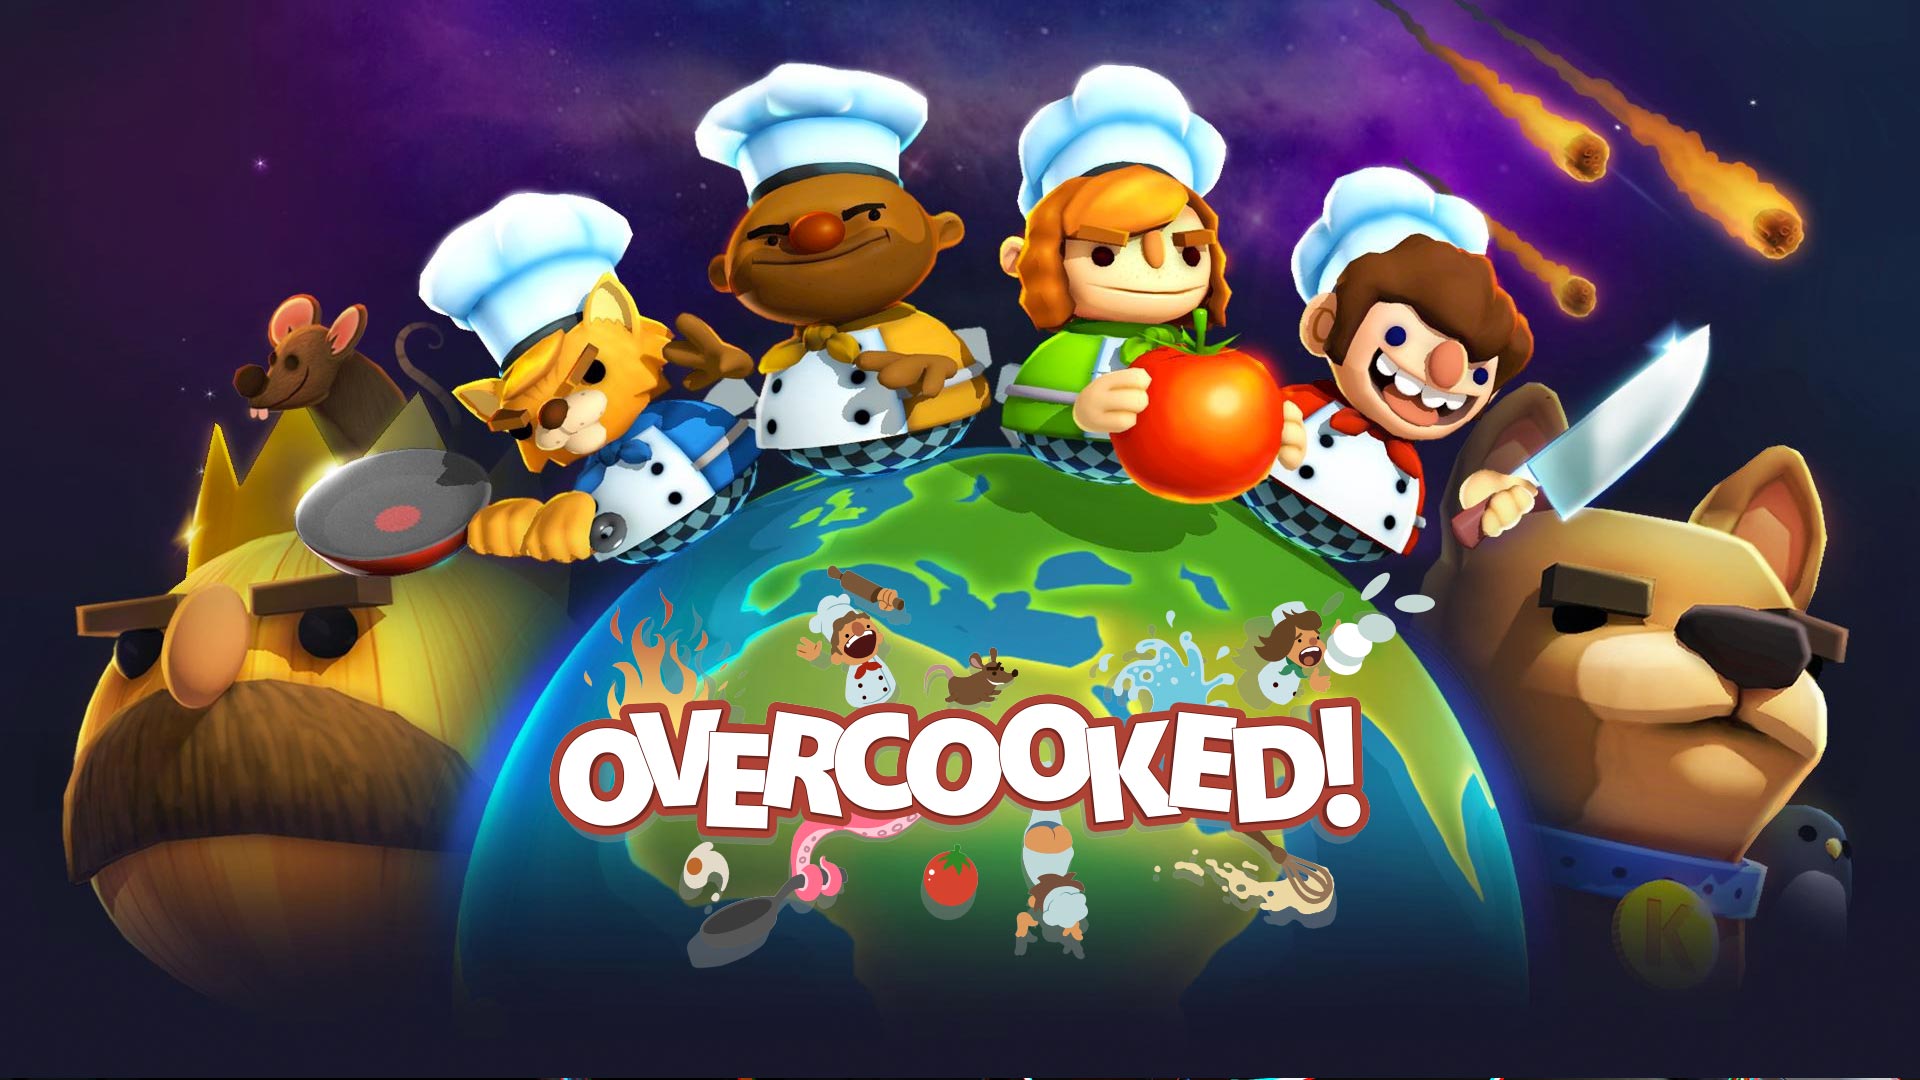 Overcooked - Team17 Group PLC
